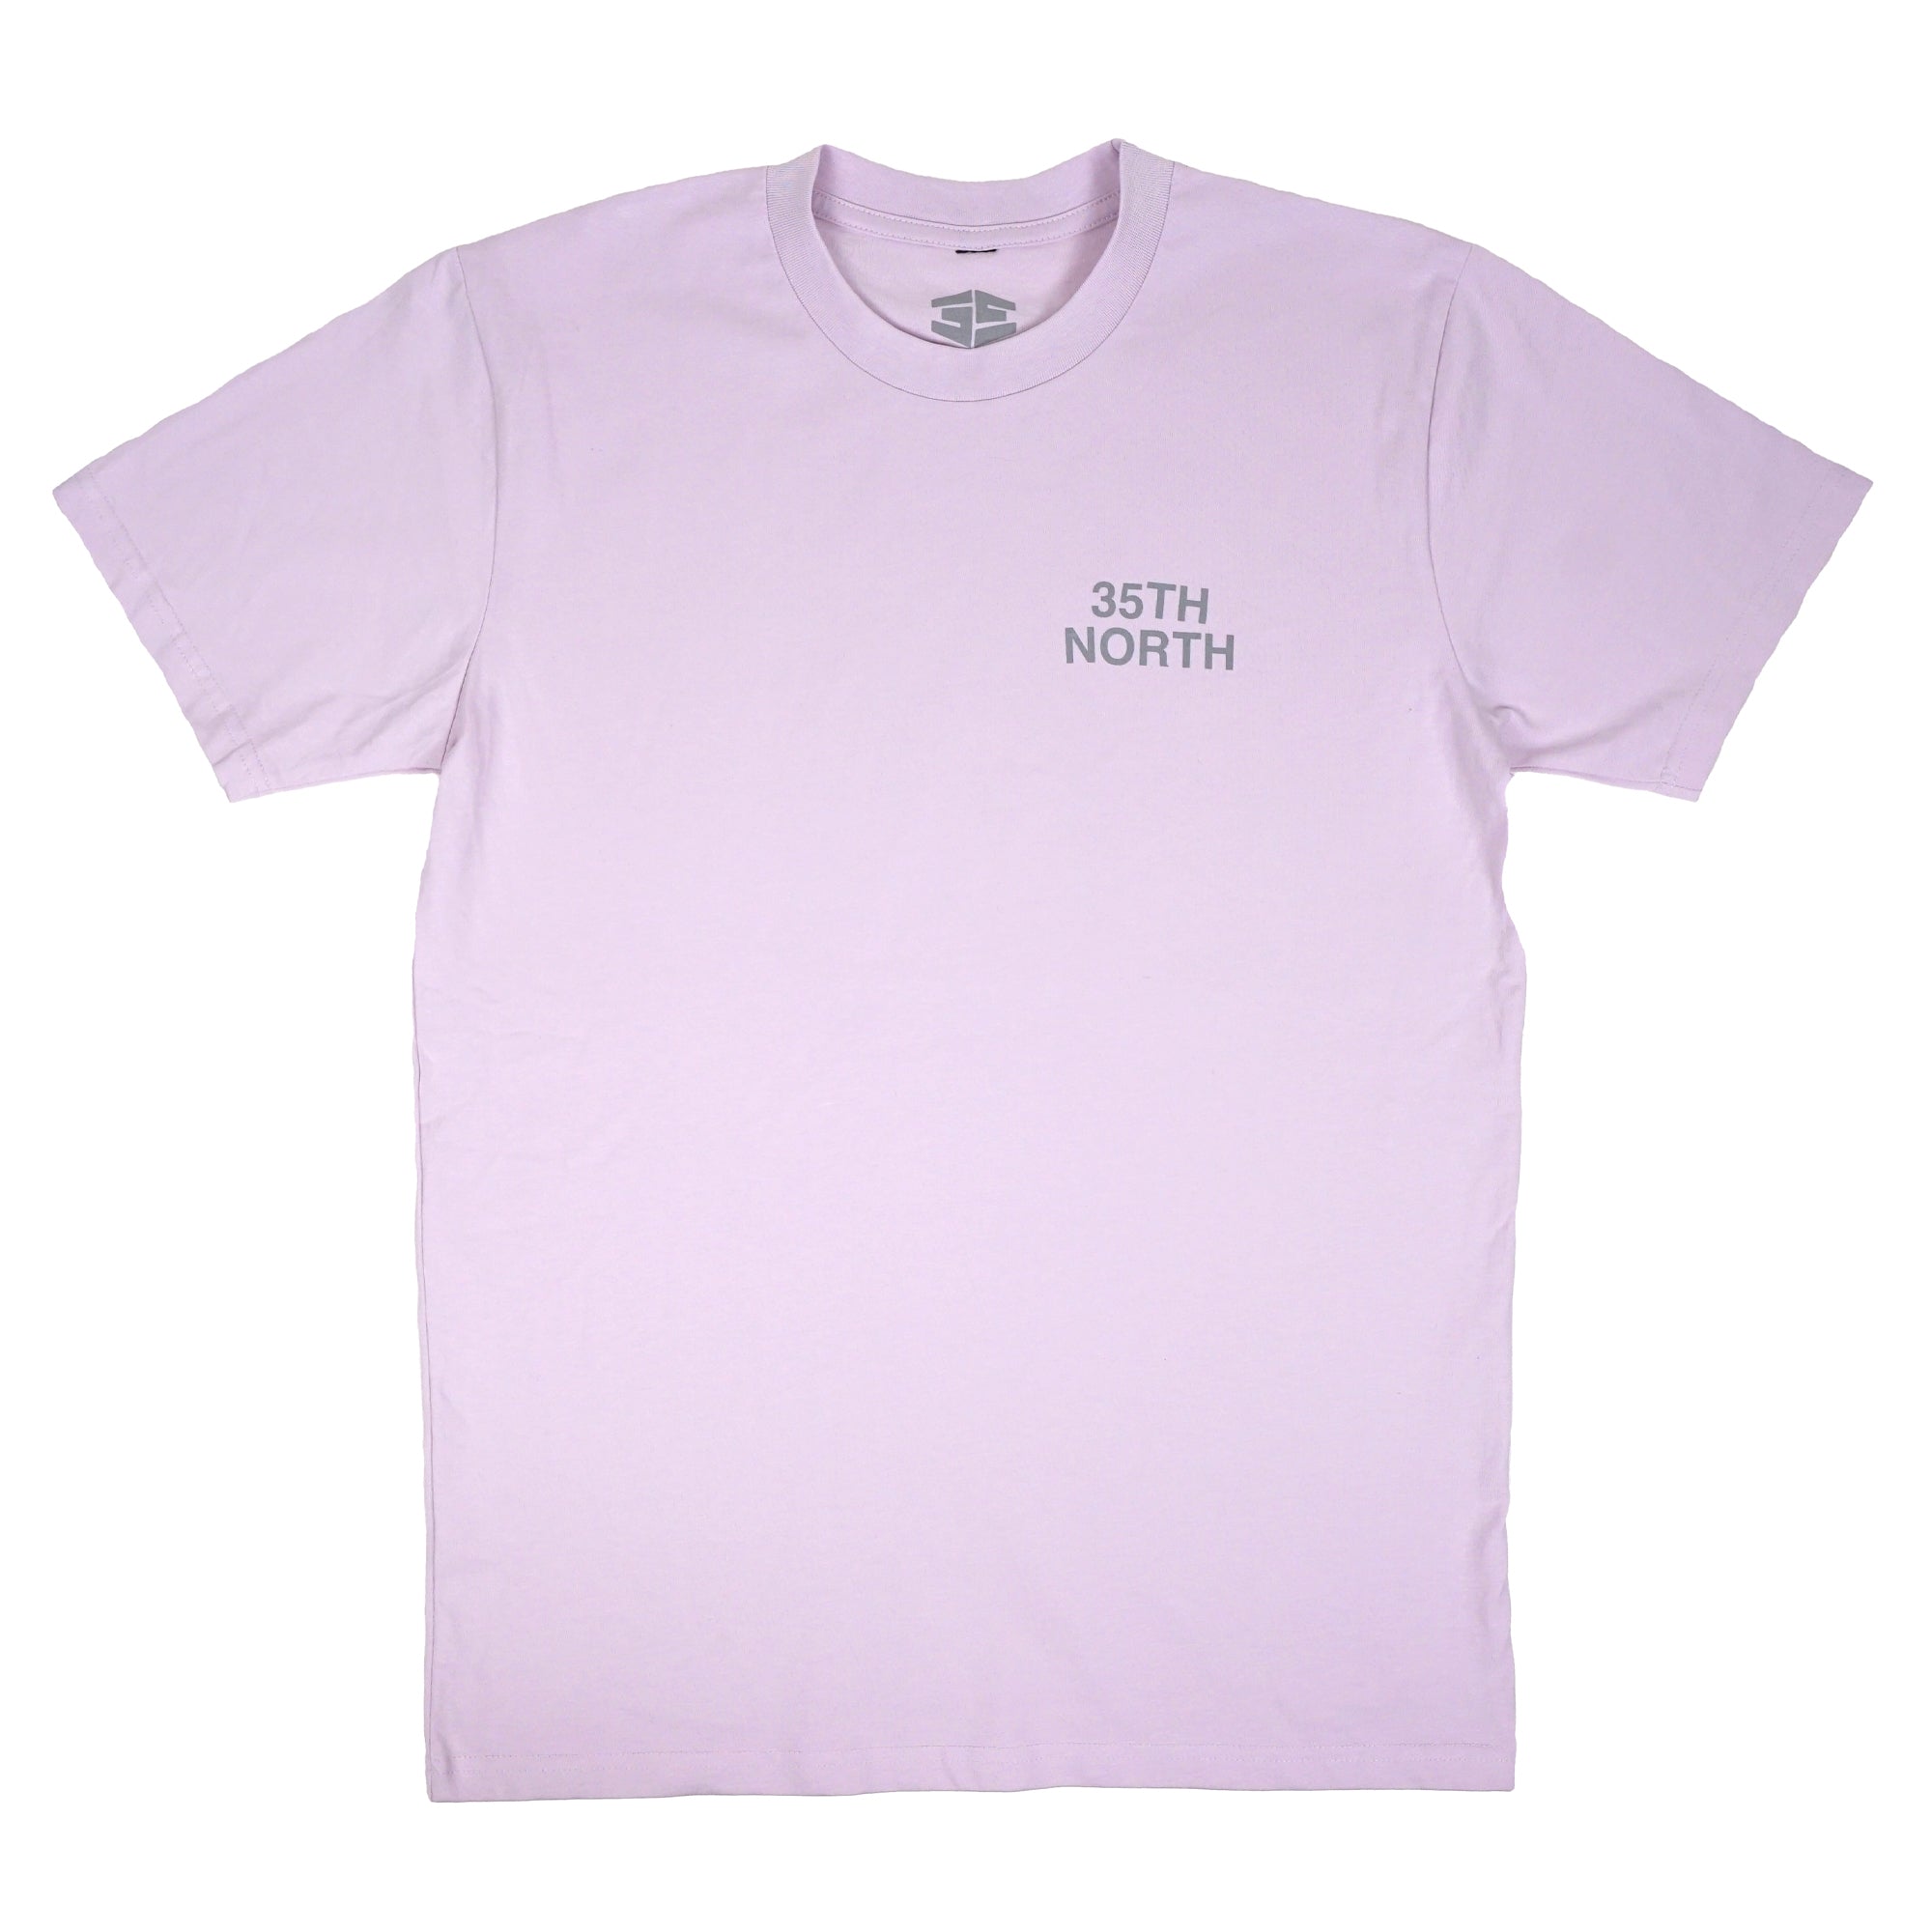 35th North 'Roll The Dice' T-Shirt - Lavender